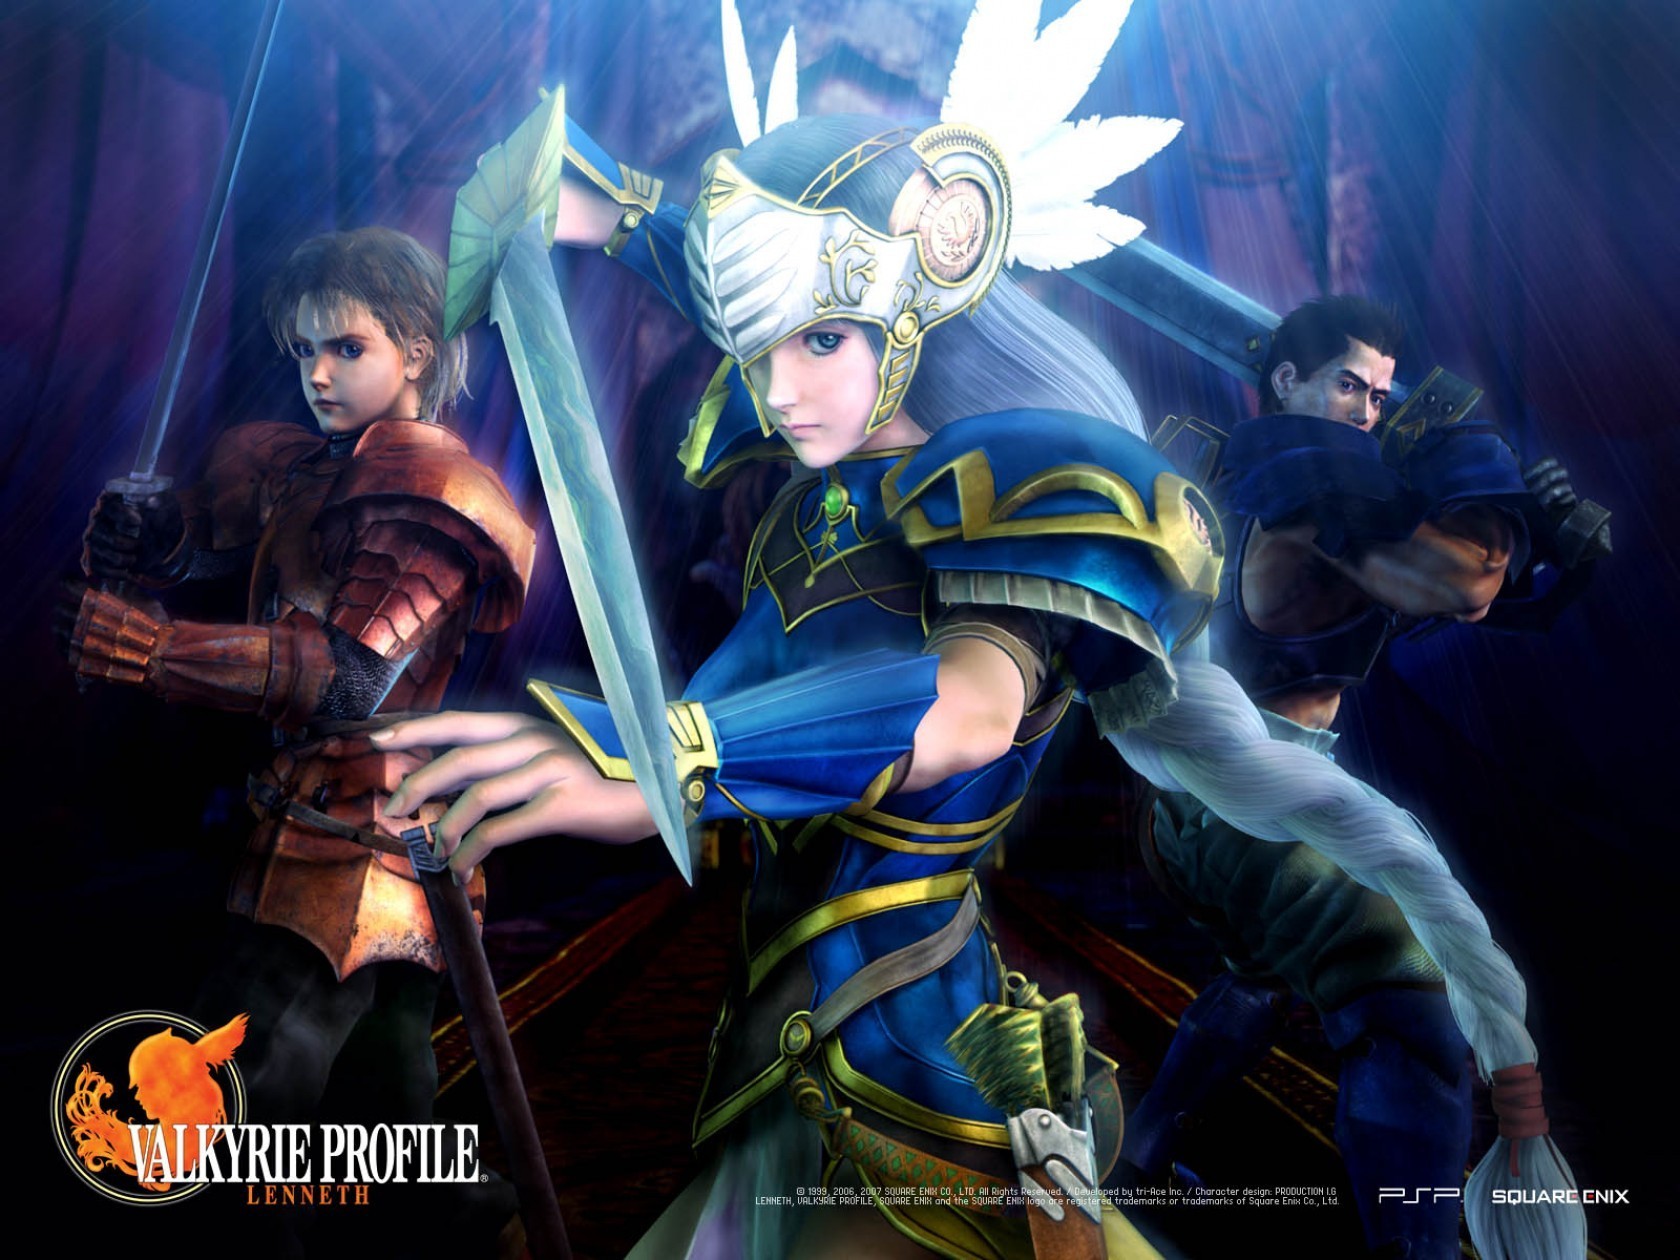 Valkyrie Profile Image HD Wallpaper And